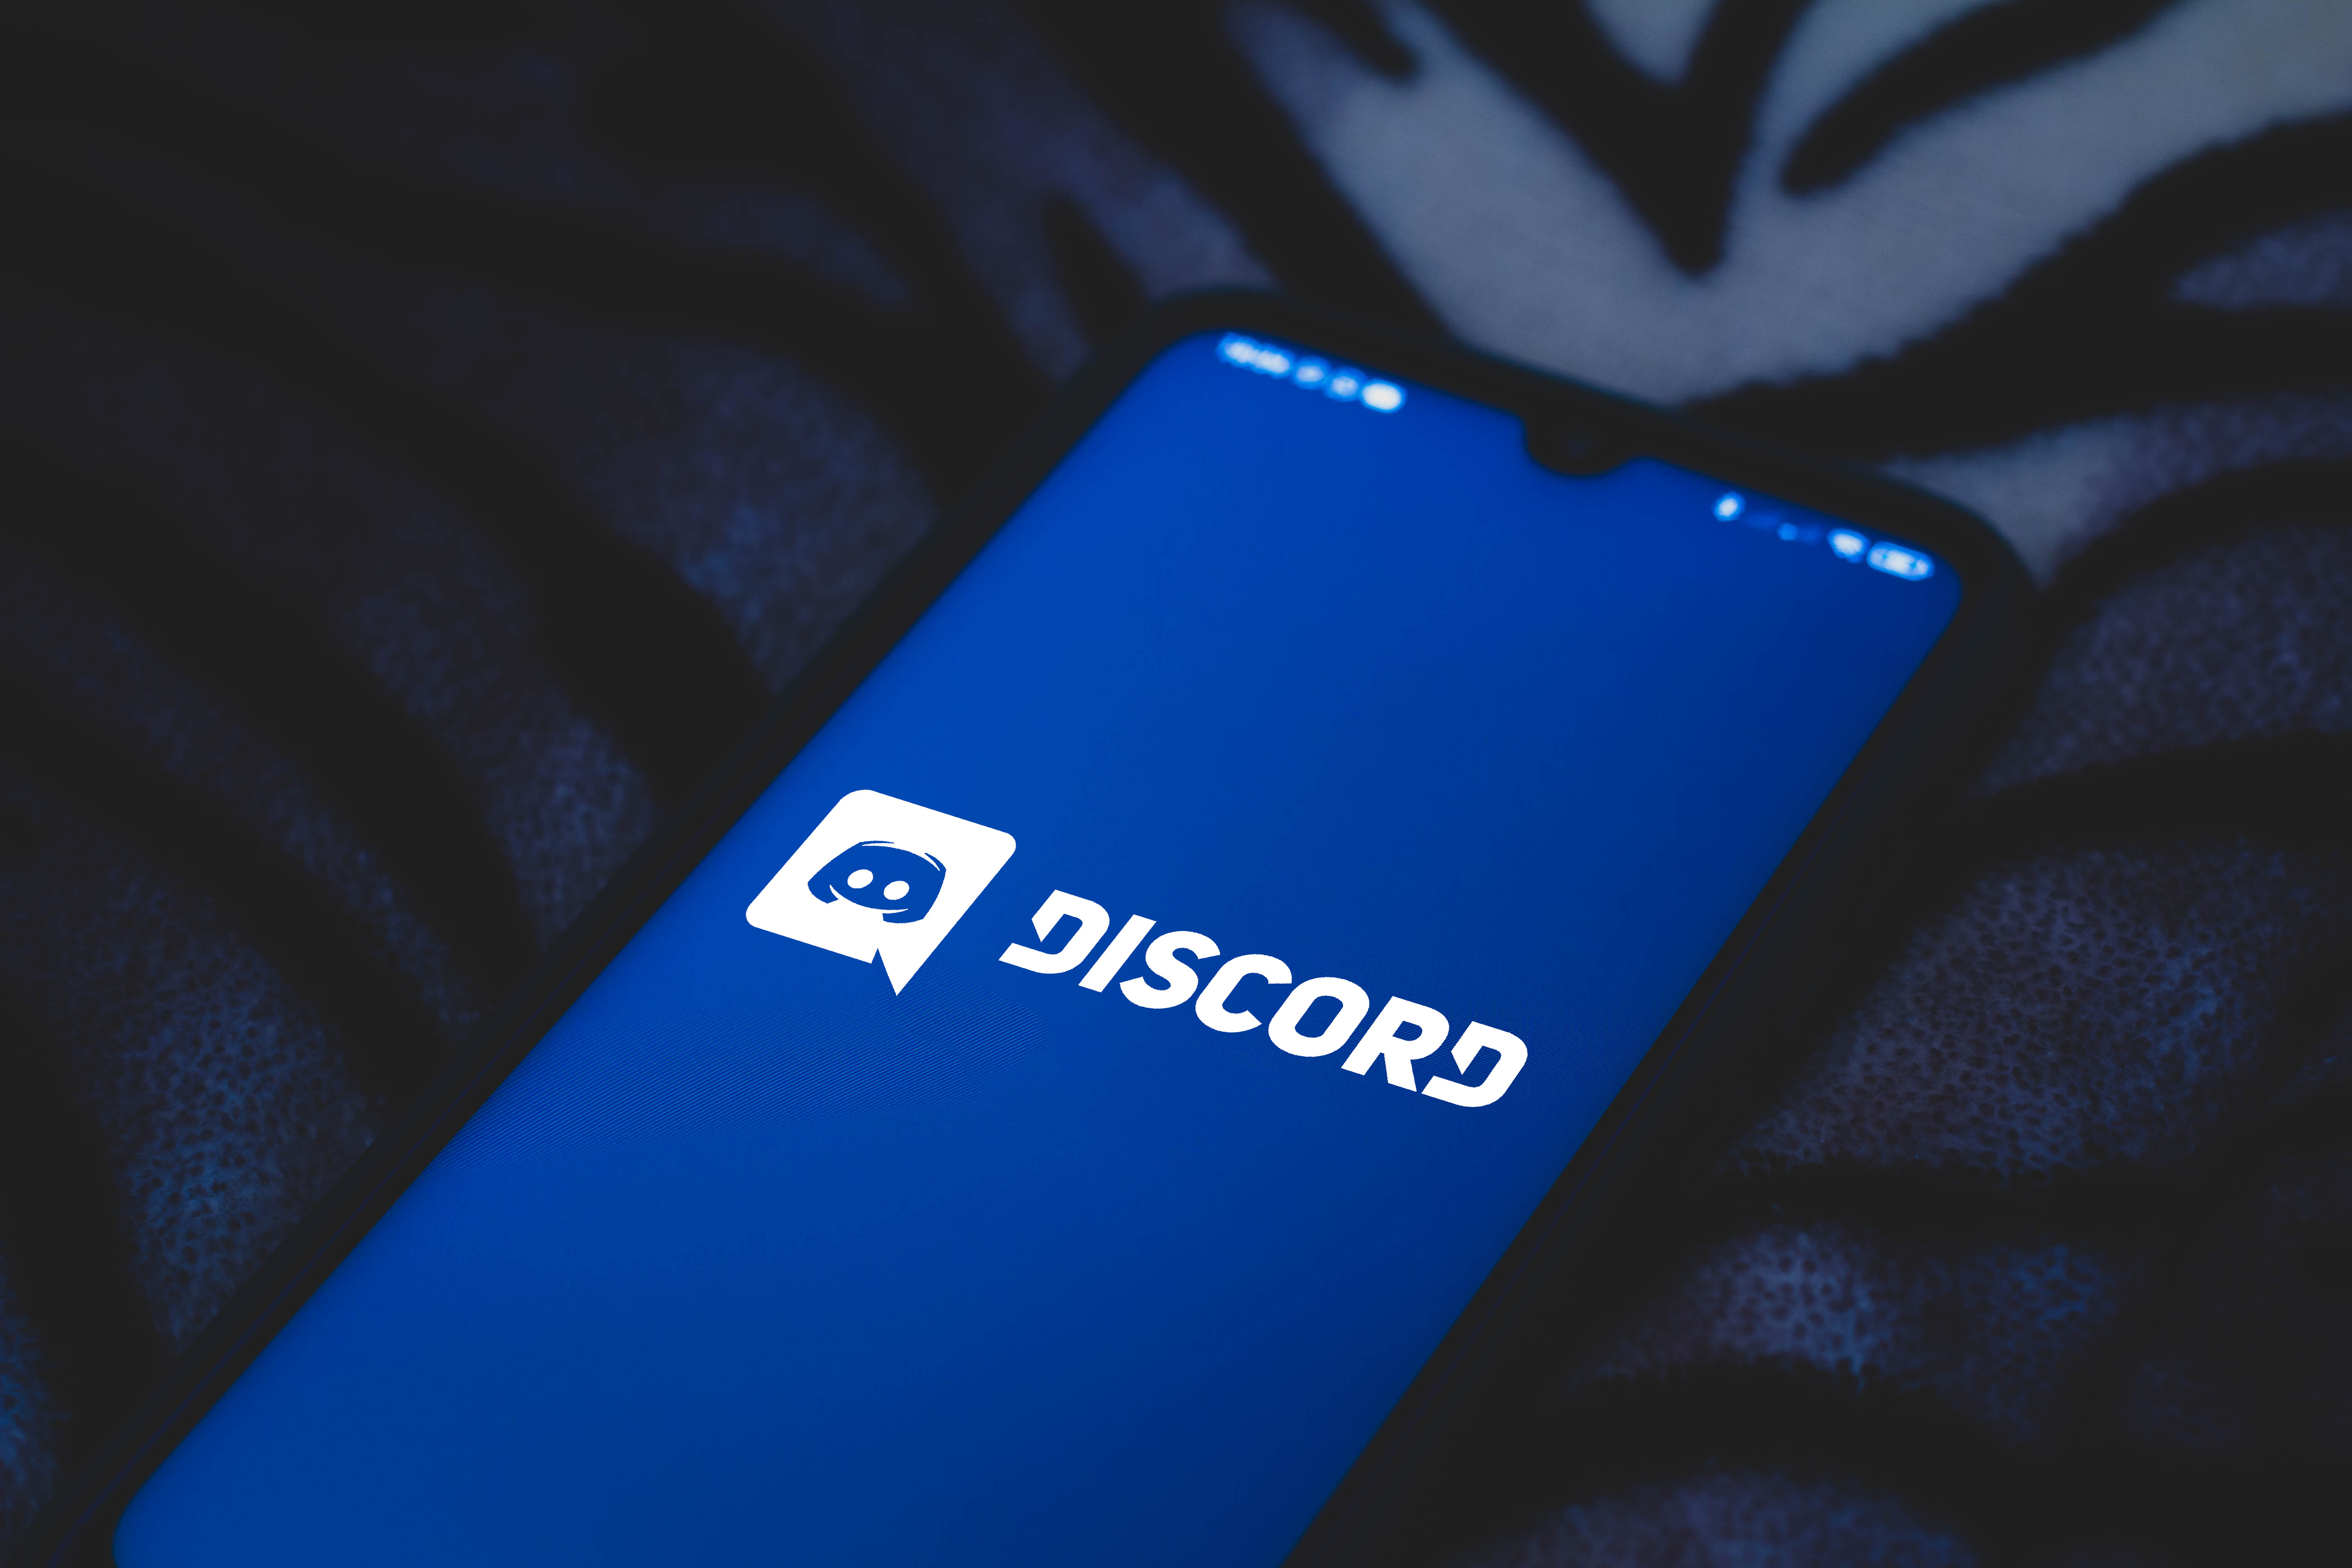 WSJ: Microsoft is now in ‘exclusive’ talks to acquire Discord